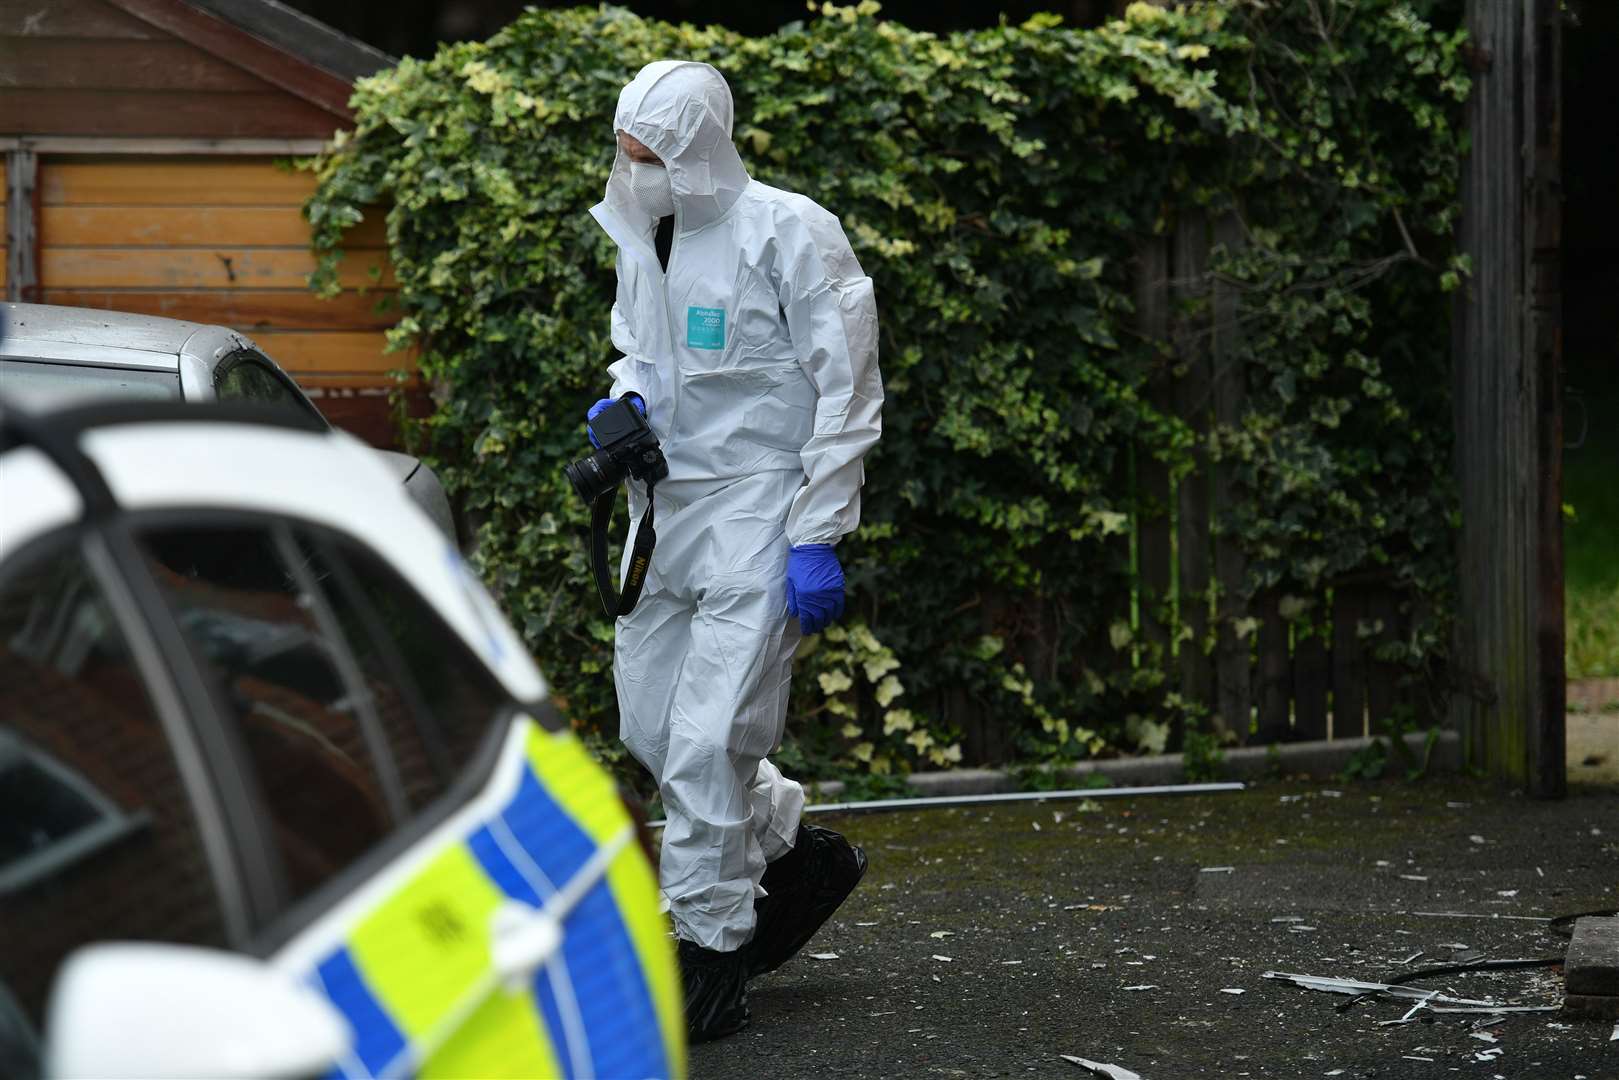 A forensics investigator outside a property in Selly Oak, Birmingham (Jacob King/PA)